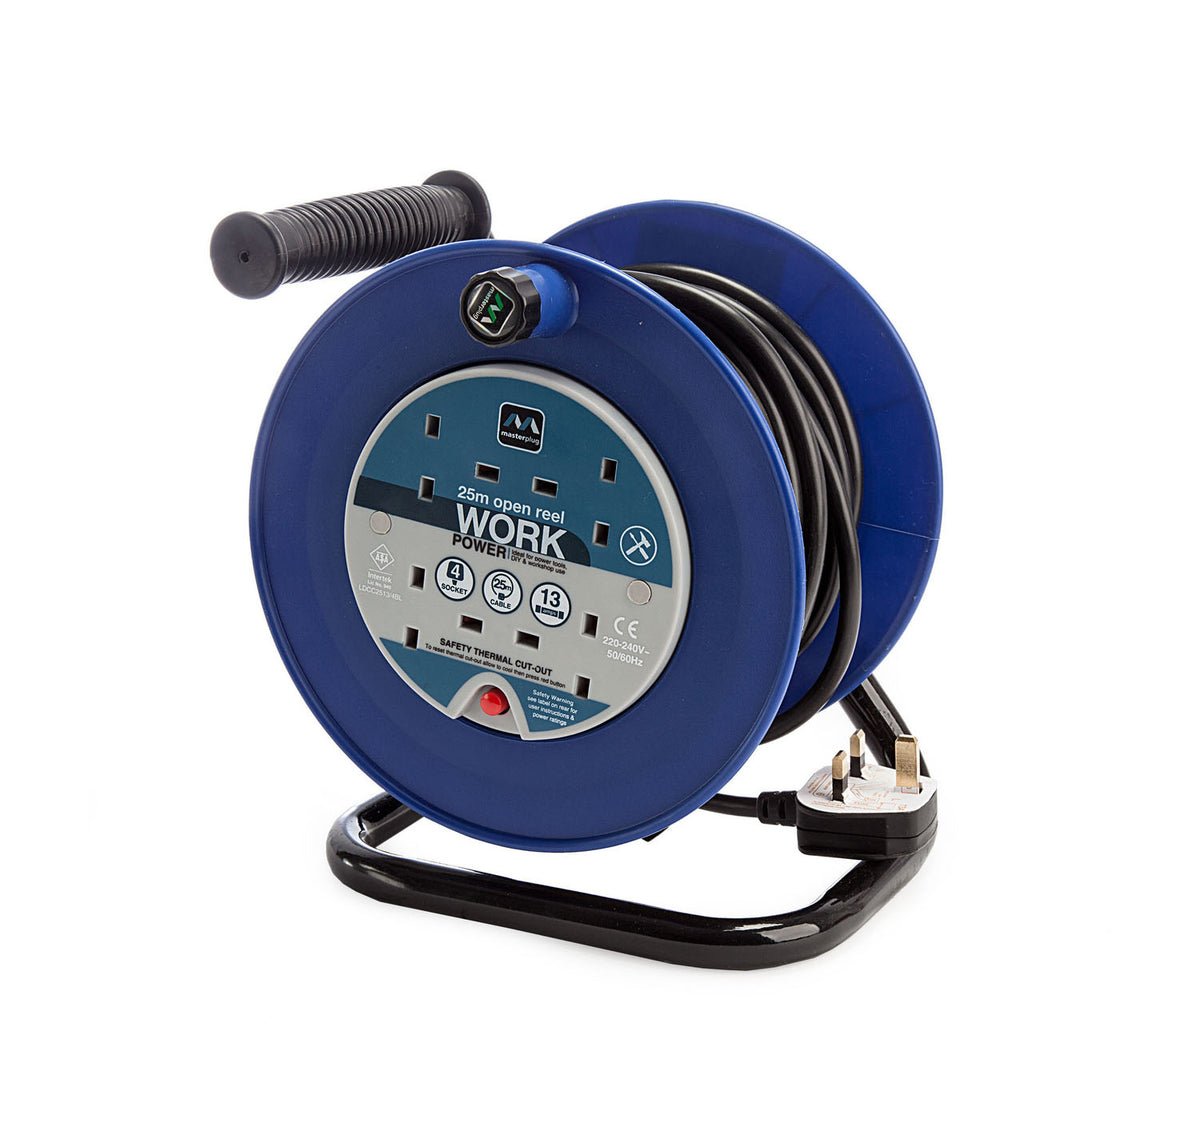 BG Masterplug 4 Gang Open Cable Reel 25m – Just The Job